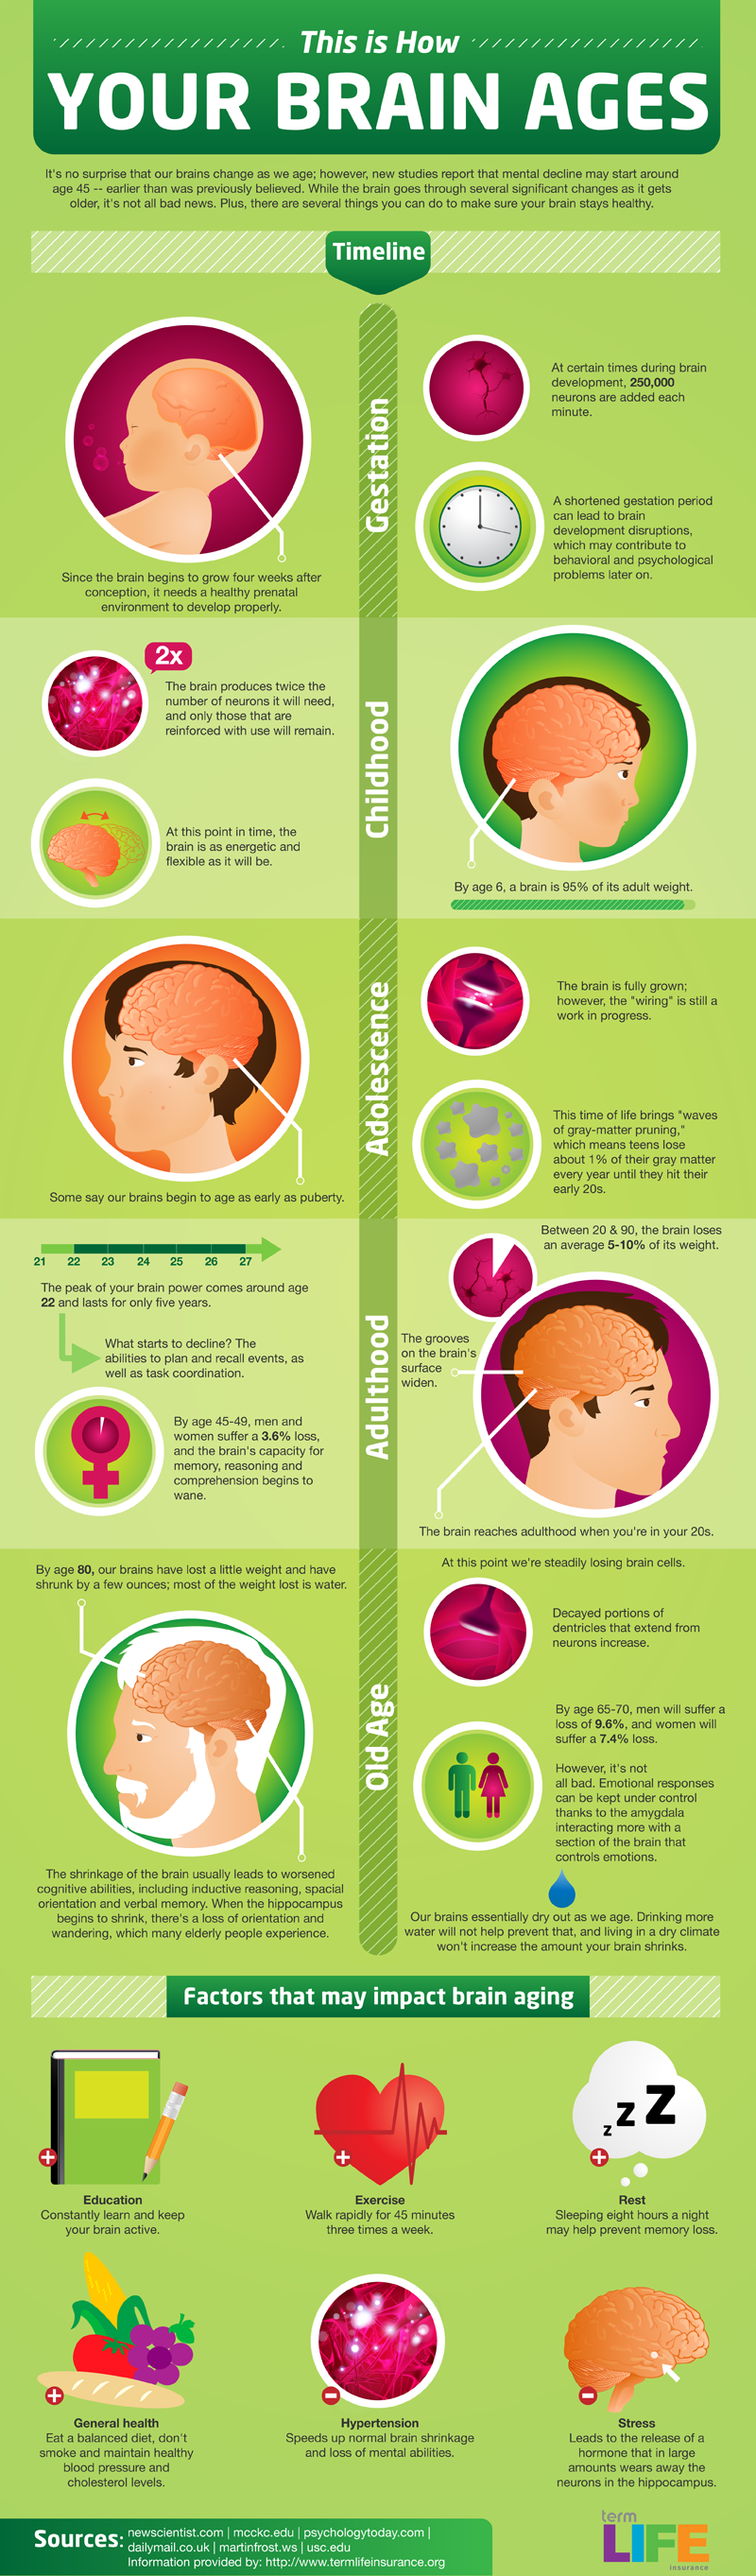 InfoGraphic on How the Brain Ages,